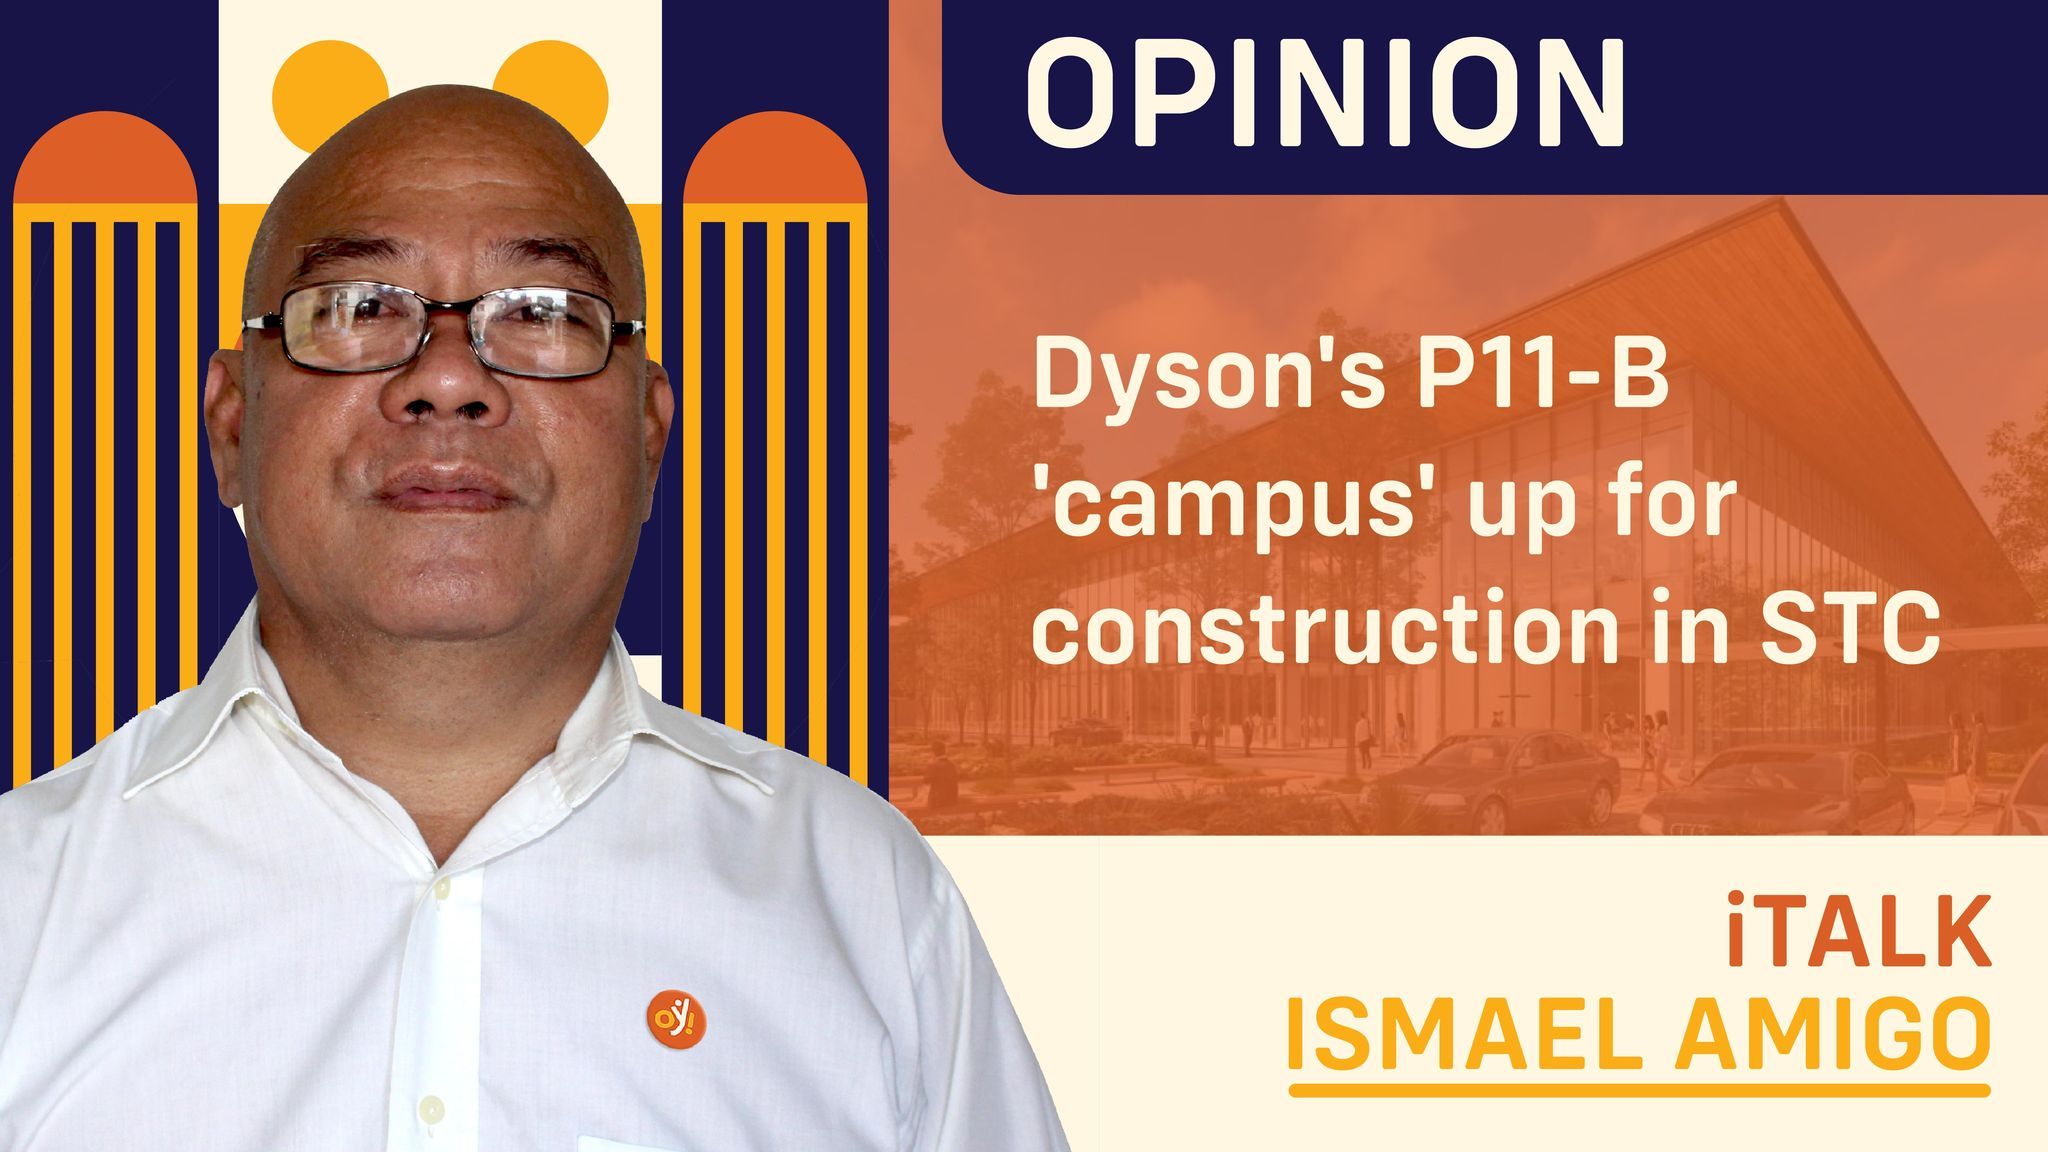 Dyson's P11-B 'campus' up for construction in STC